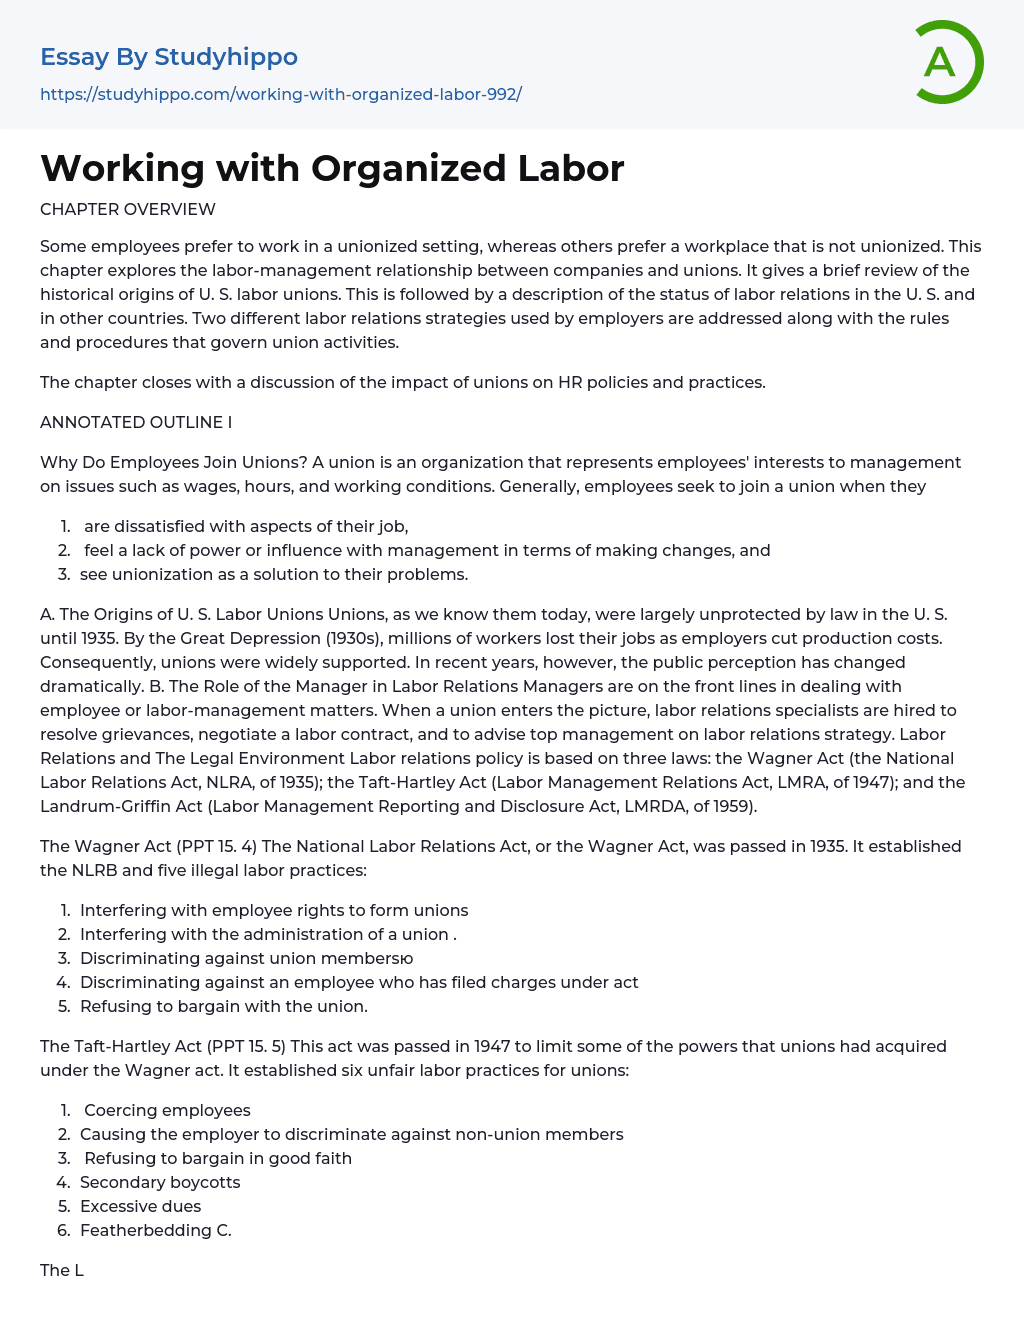 Working with Organized Labor Essay Example